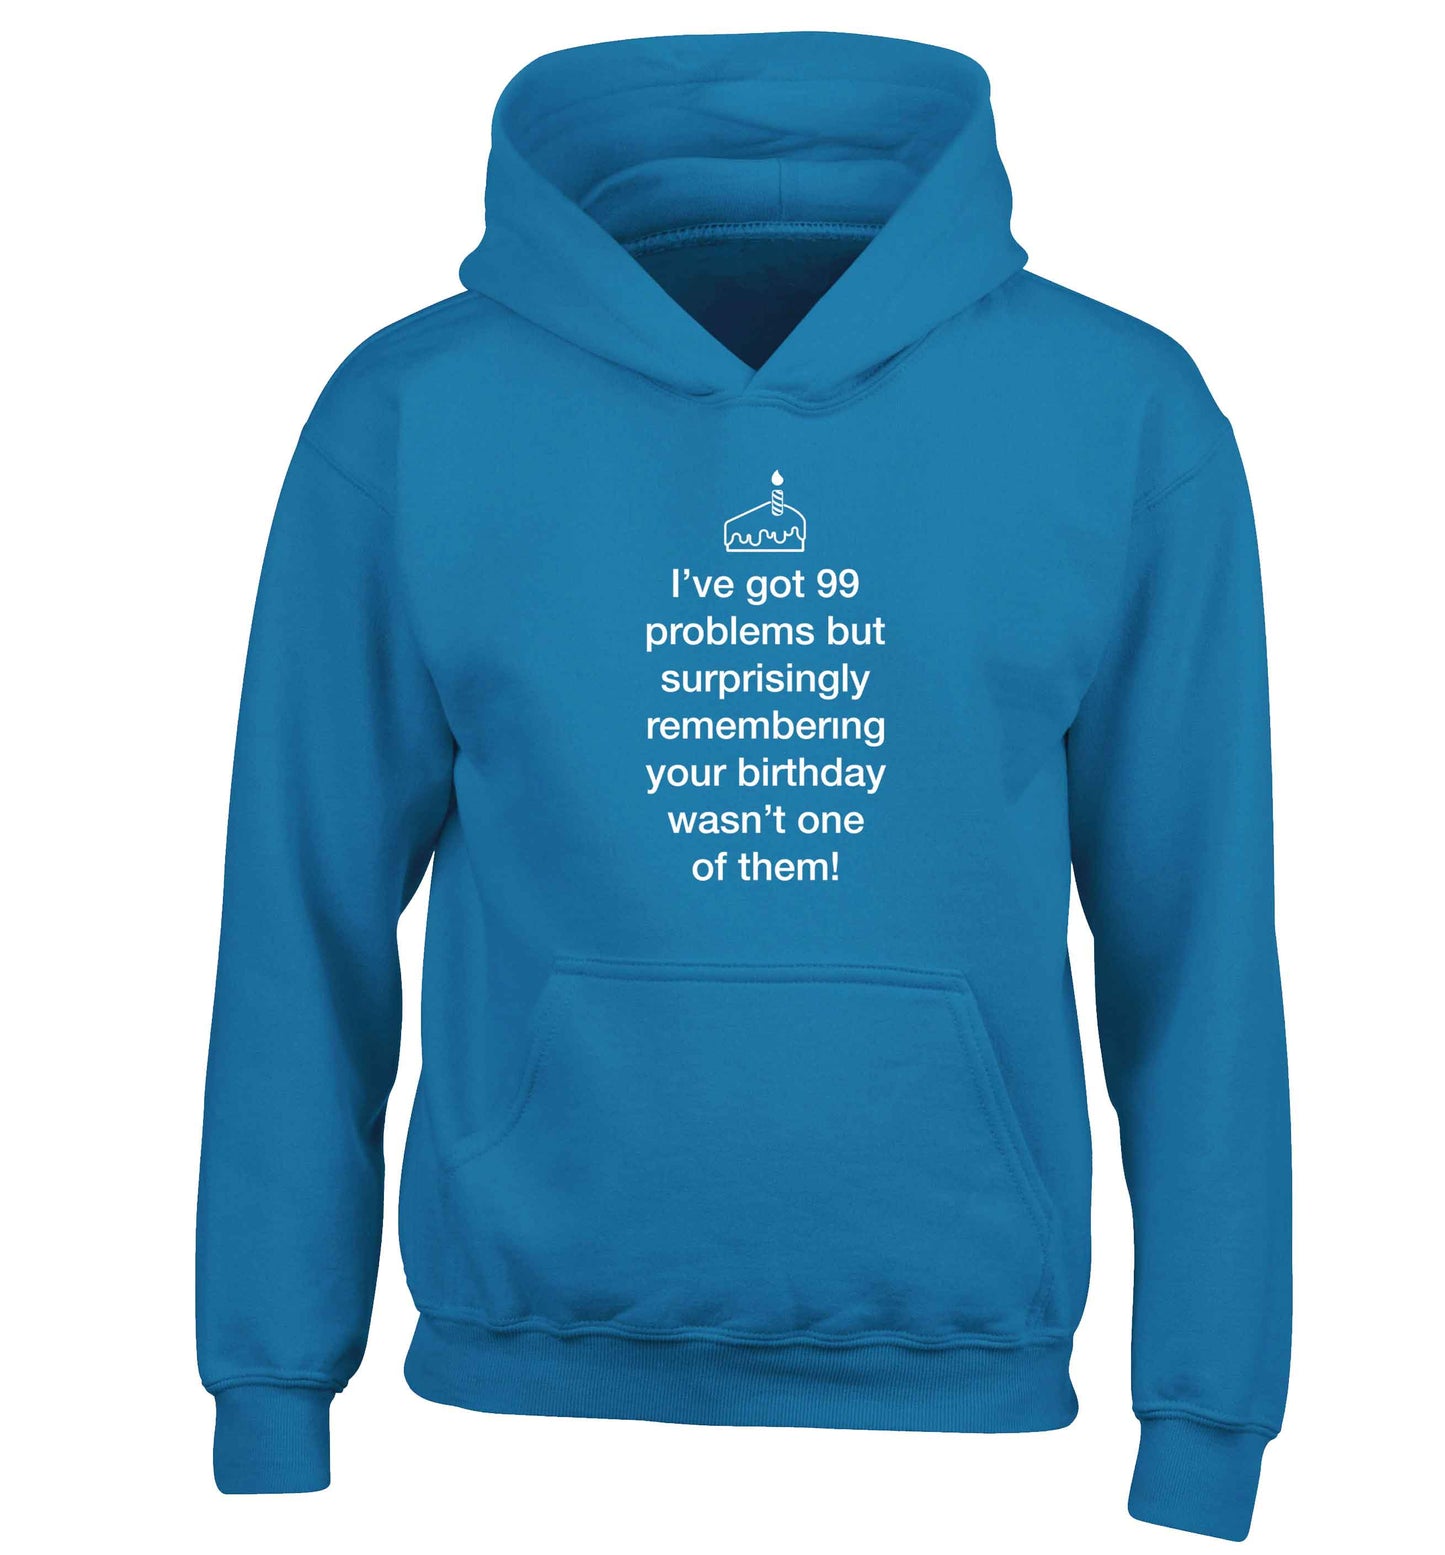 I've got 99 problems but surprisingly remembering your birthday wasn't one of them! children's blue hoodie 12-13 Years